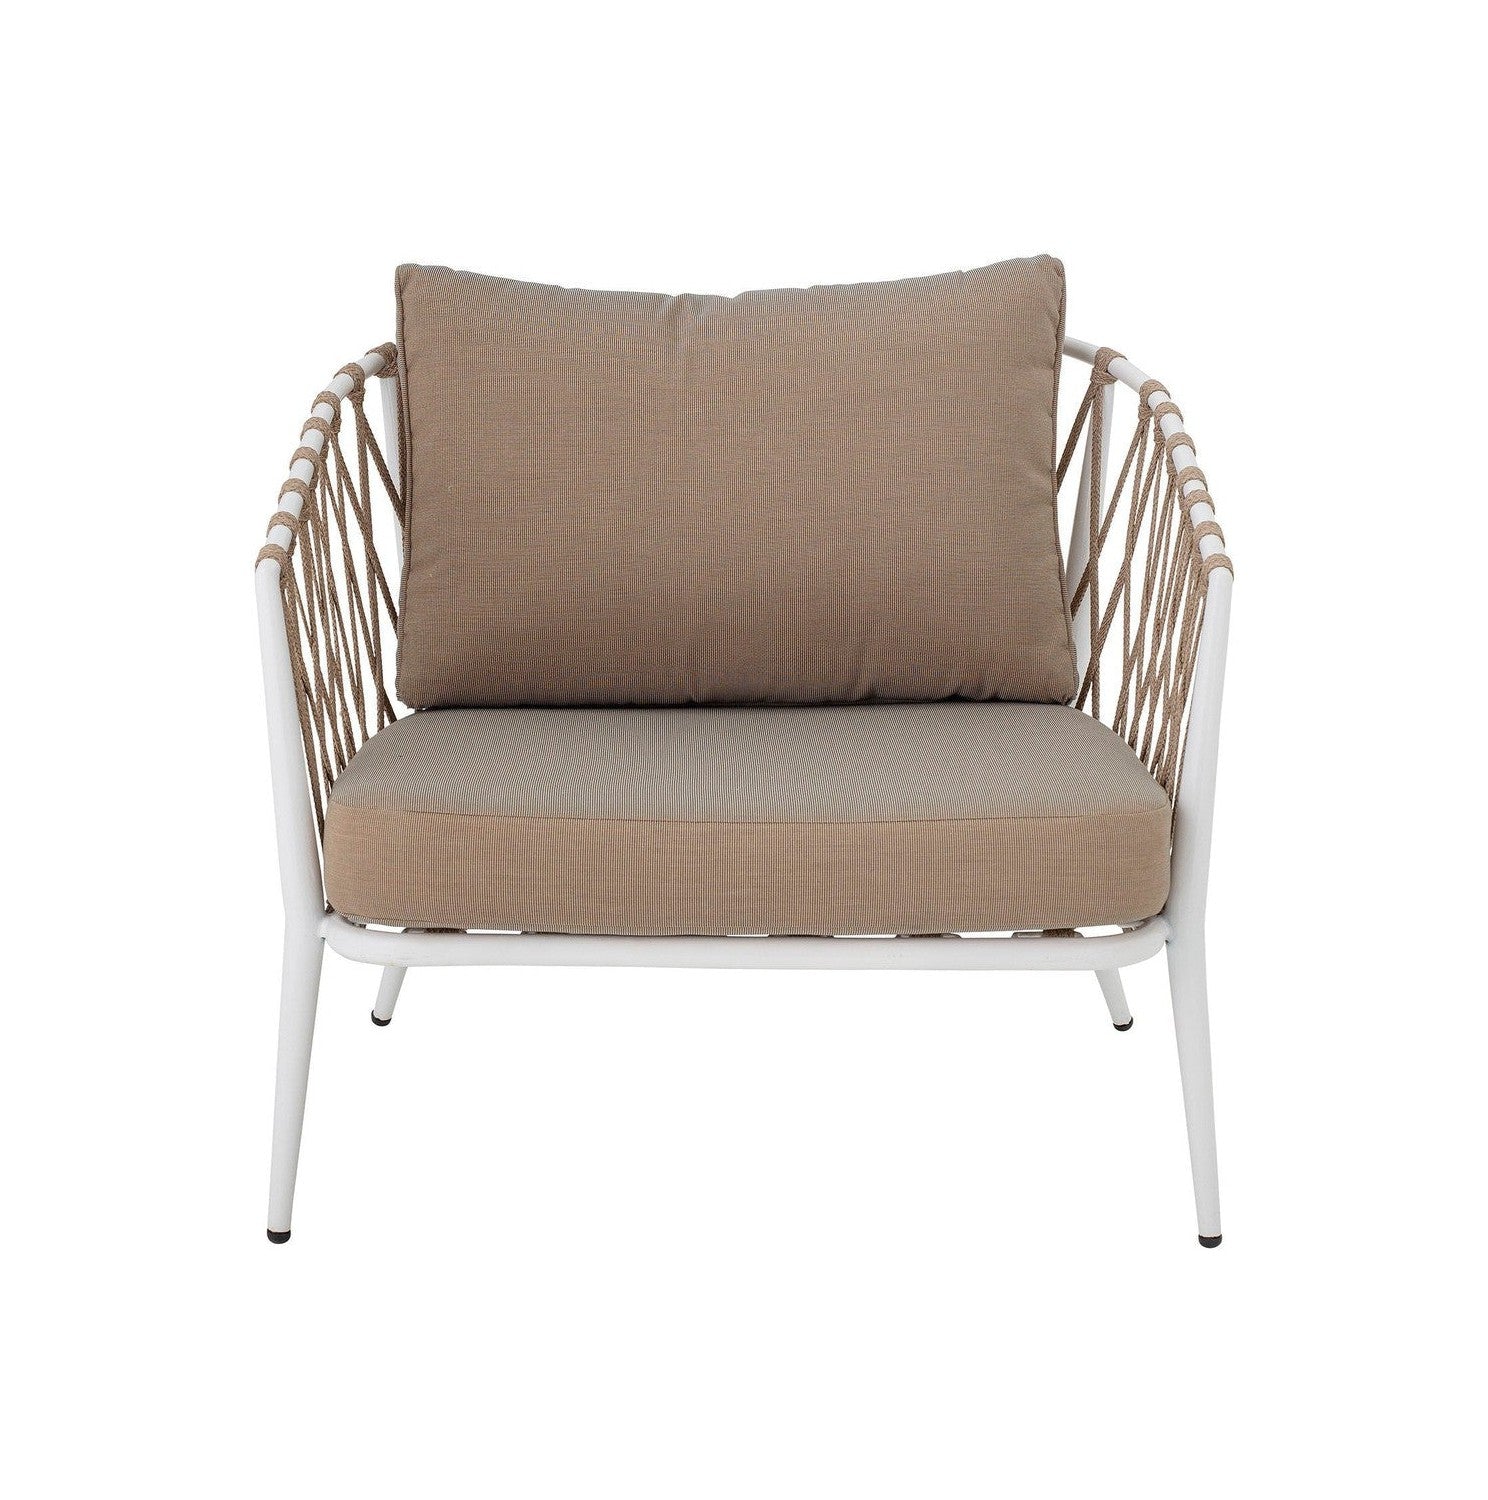 Creative Collection Cia Lounge Chair, White, Metal